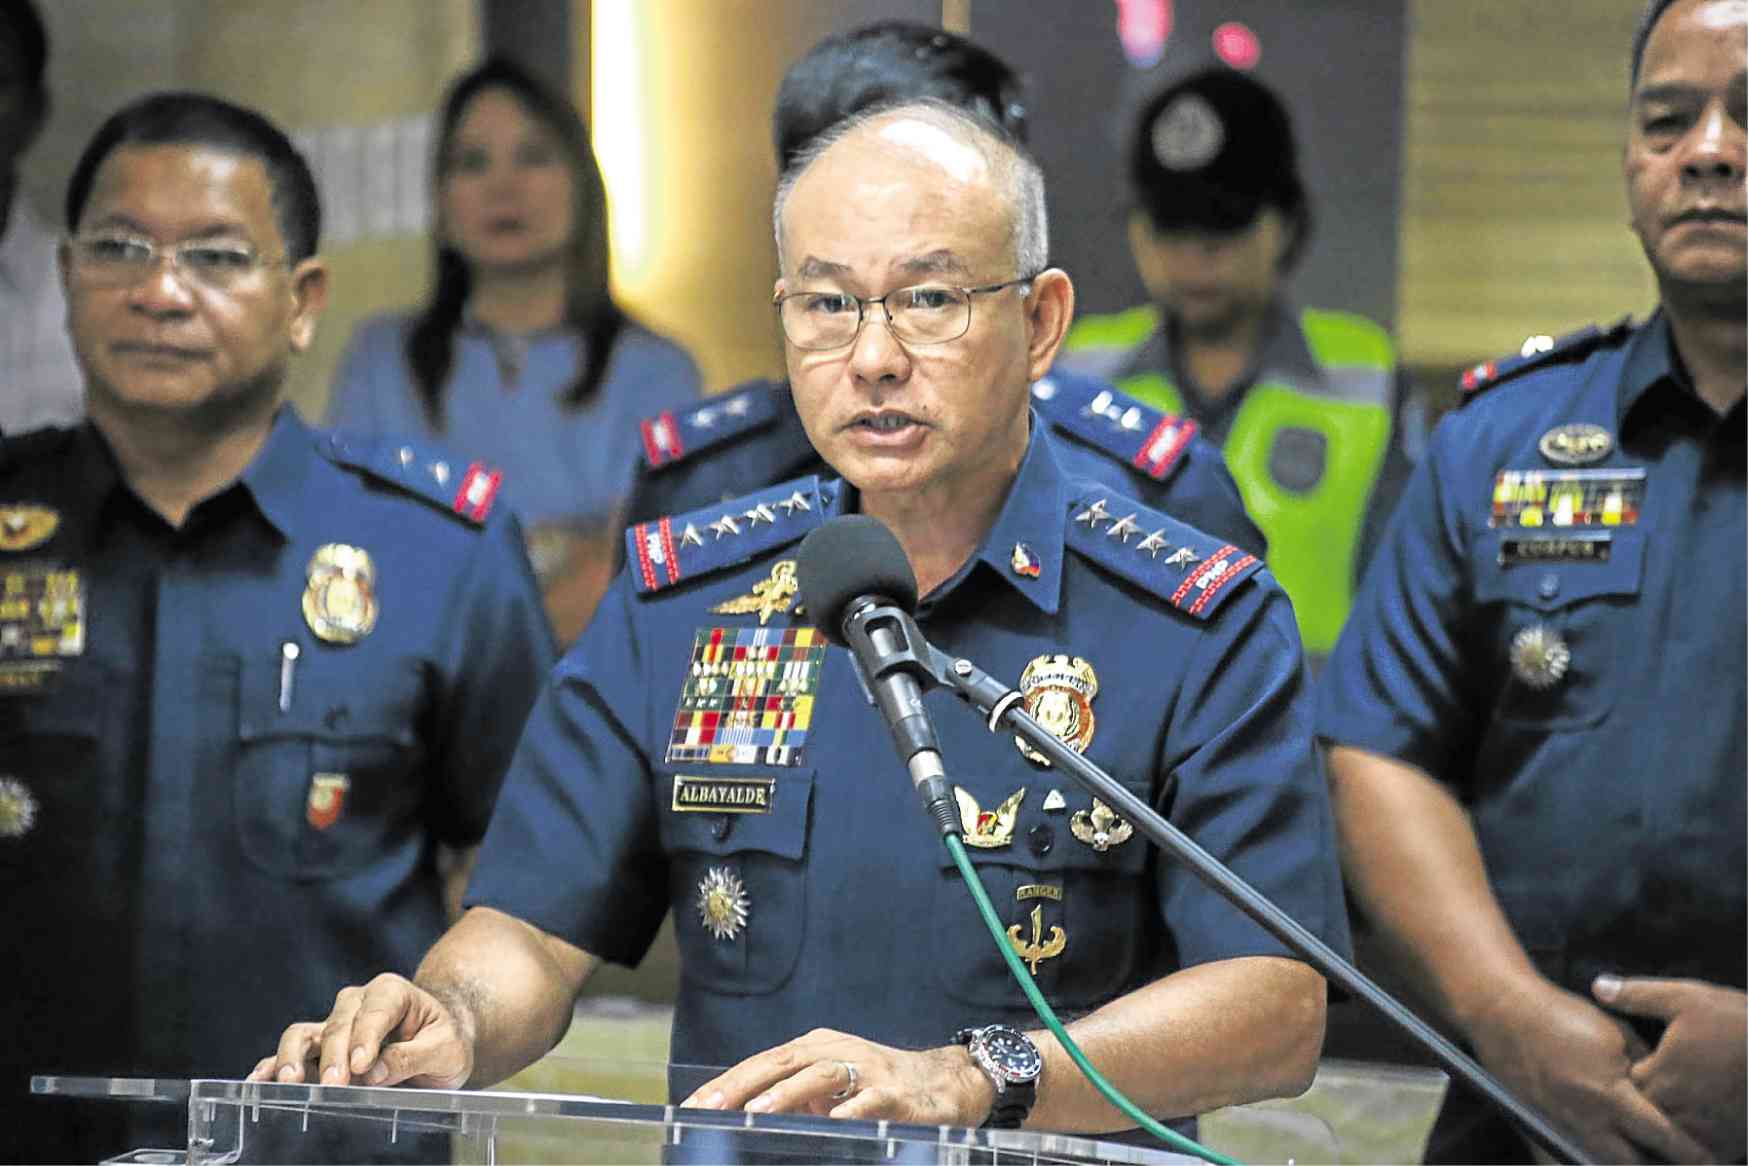 Passport data loss a threat to national security - PNP chief